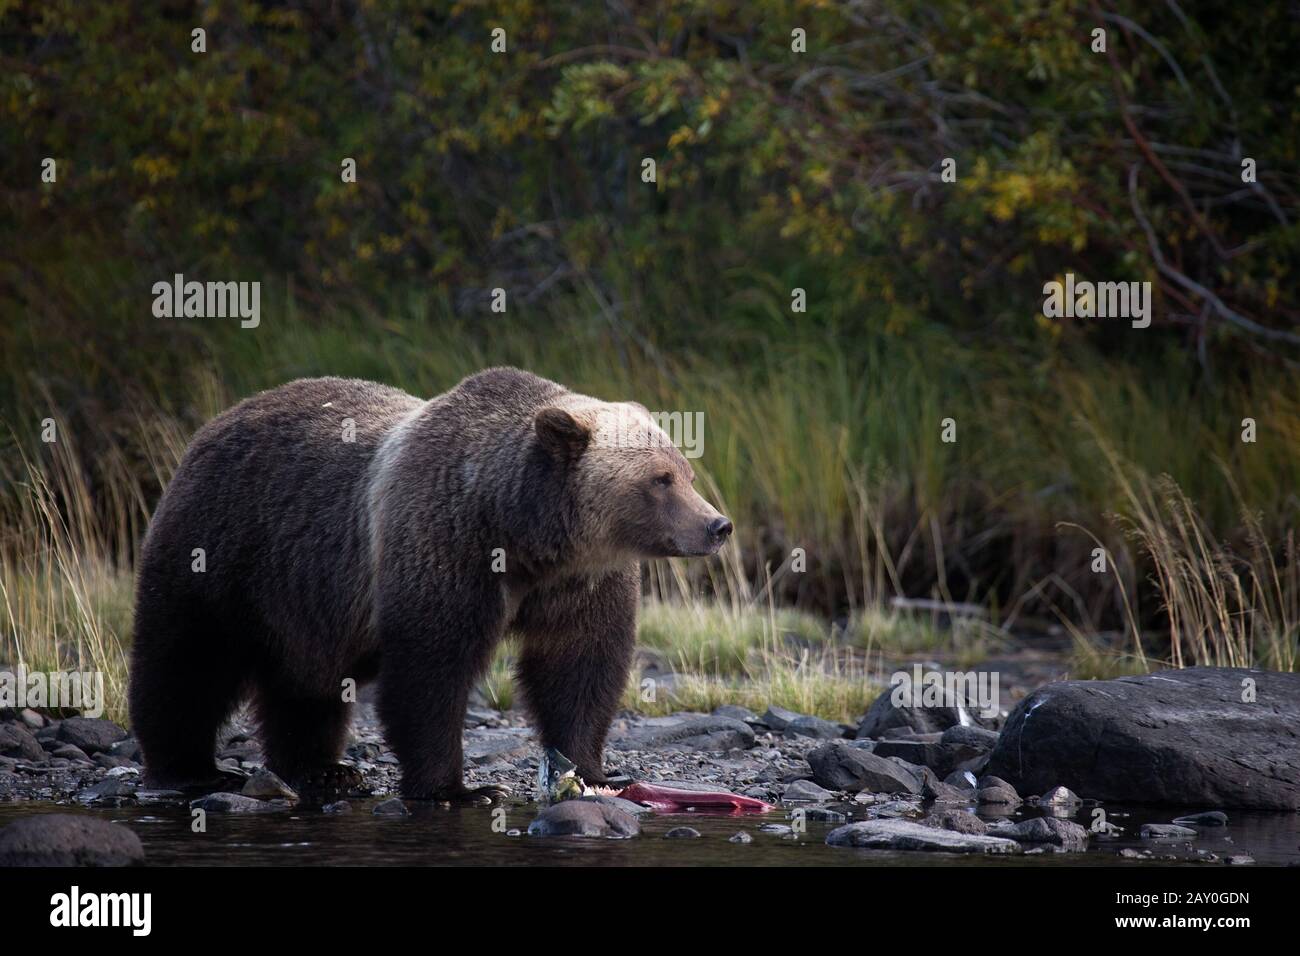 Grizzly bear eating a fish, Chilko Lake, British Columbia, Canada Stock Photo